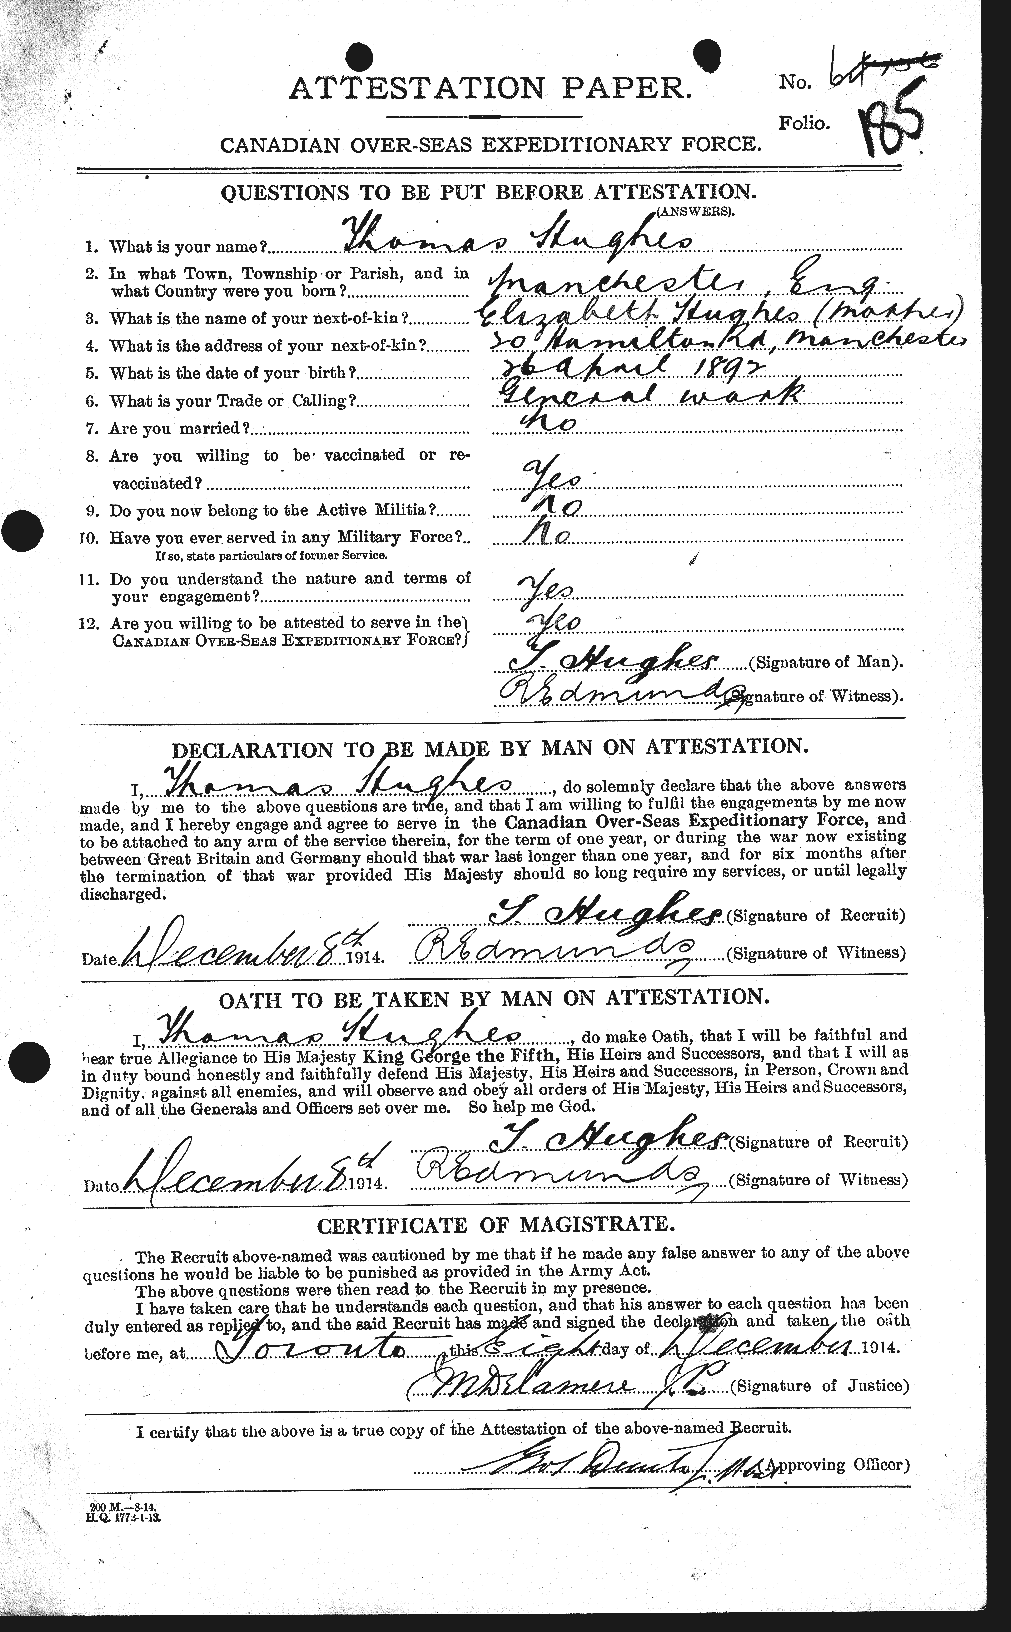 Personnel Records of the First World War - CEF 406667a